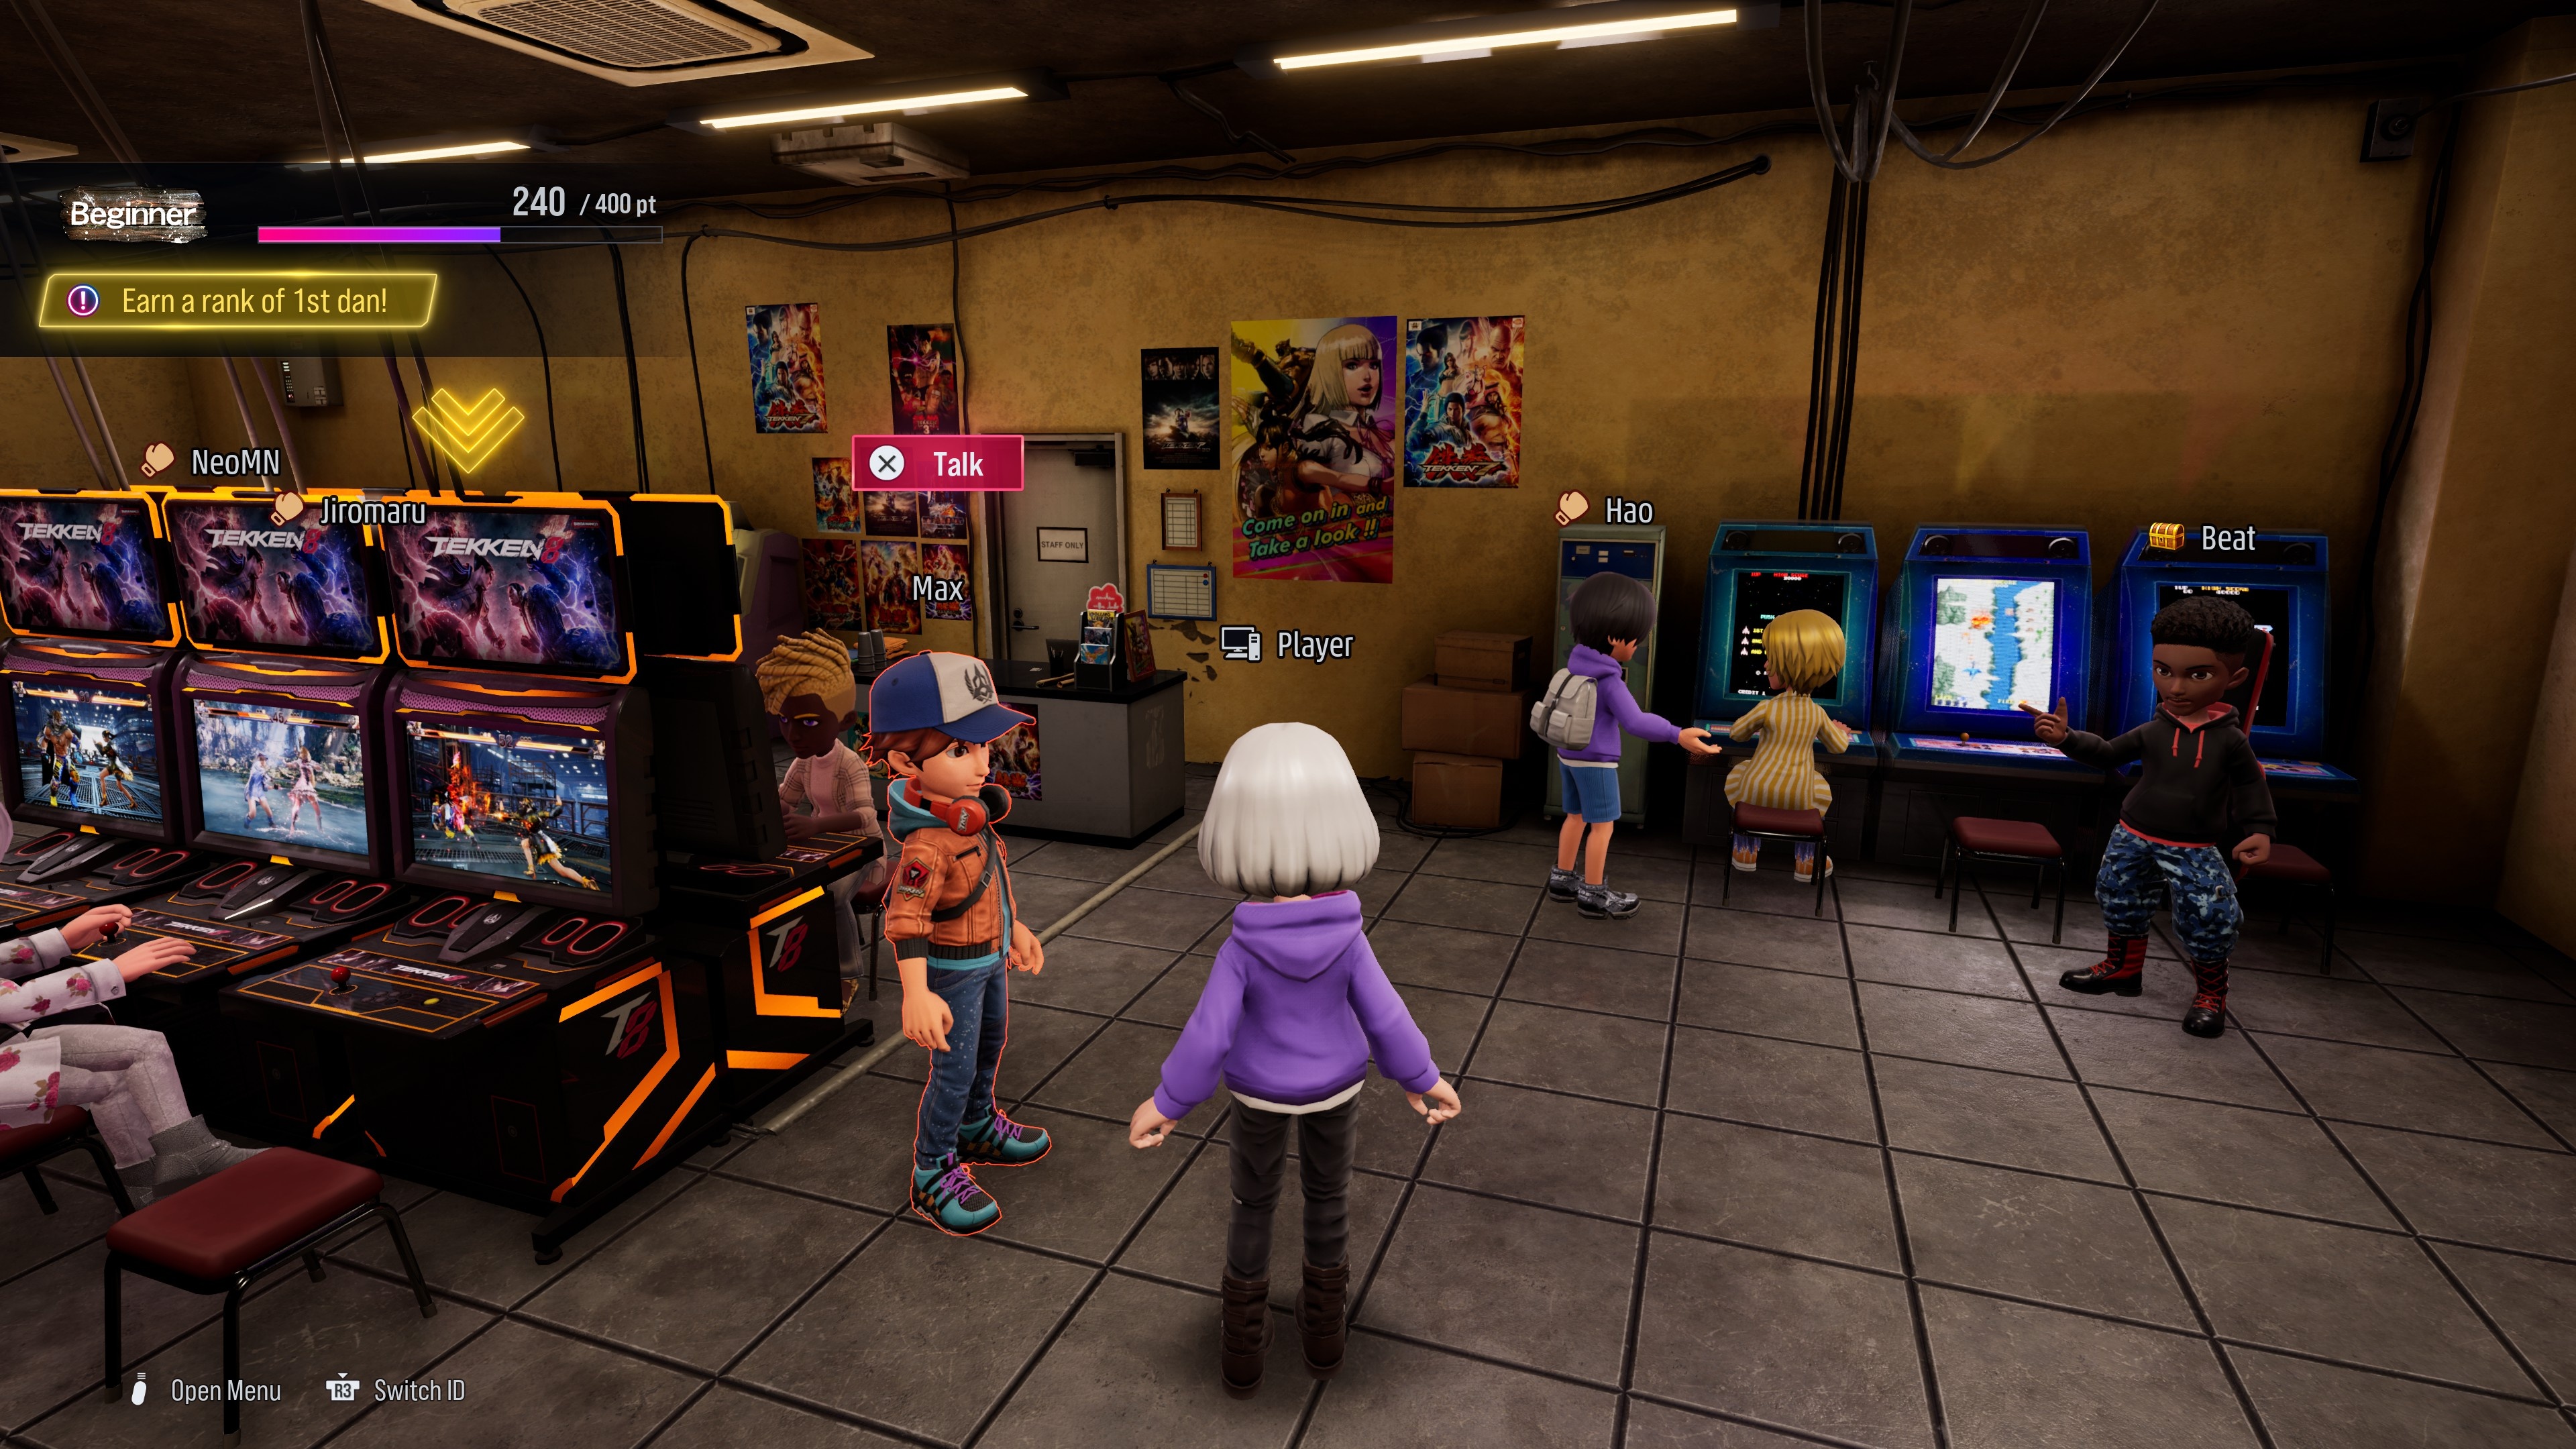 (Arcade Quest is a brand new game mode where you get to create an avatar and adventure with it in a virtual arcade separate from the main game)